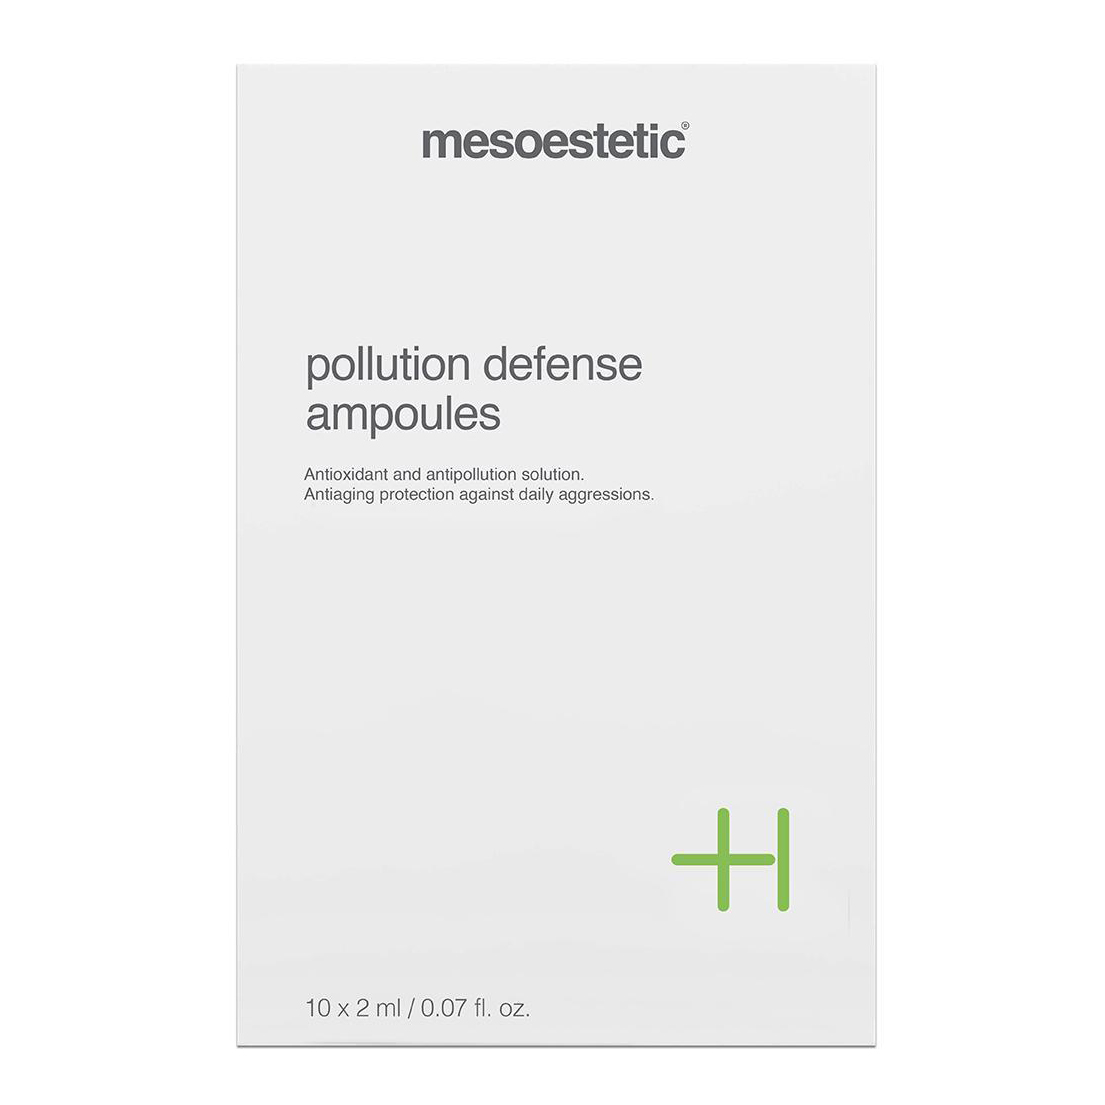 mesoestetic pollution ampoules